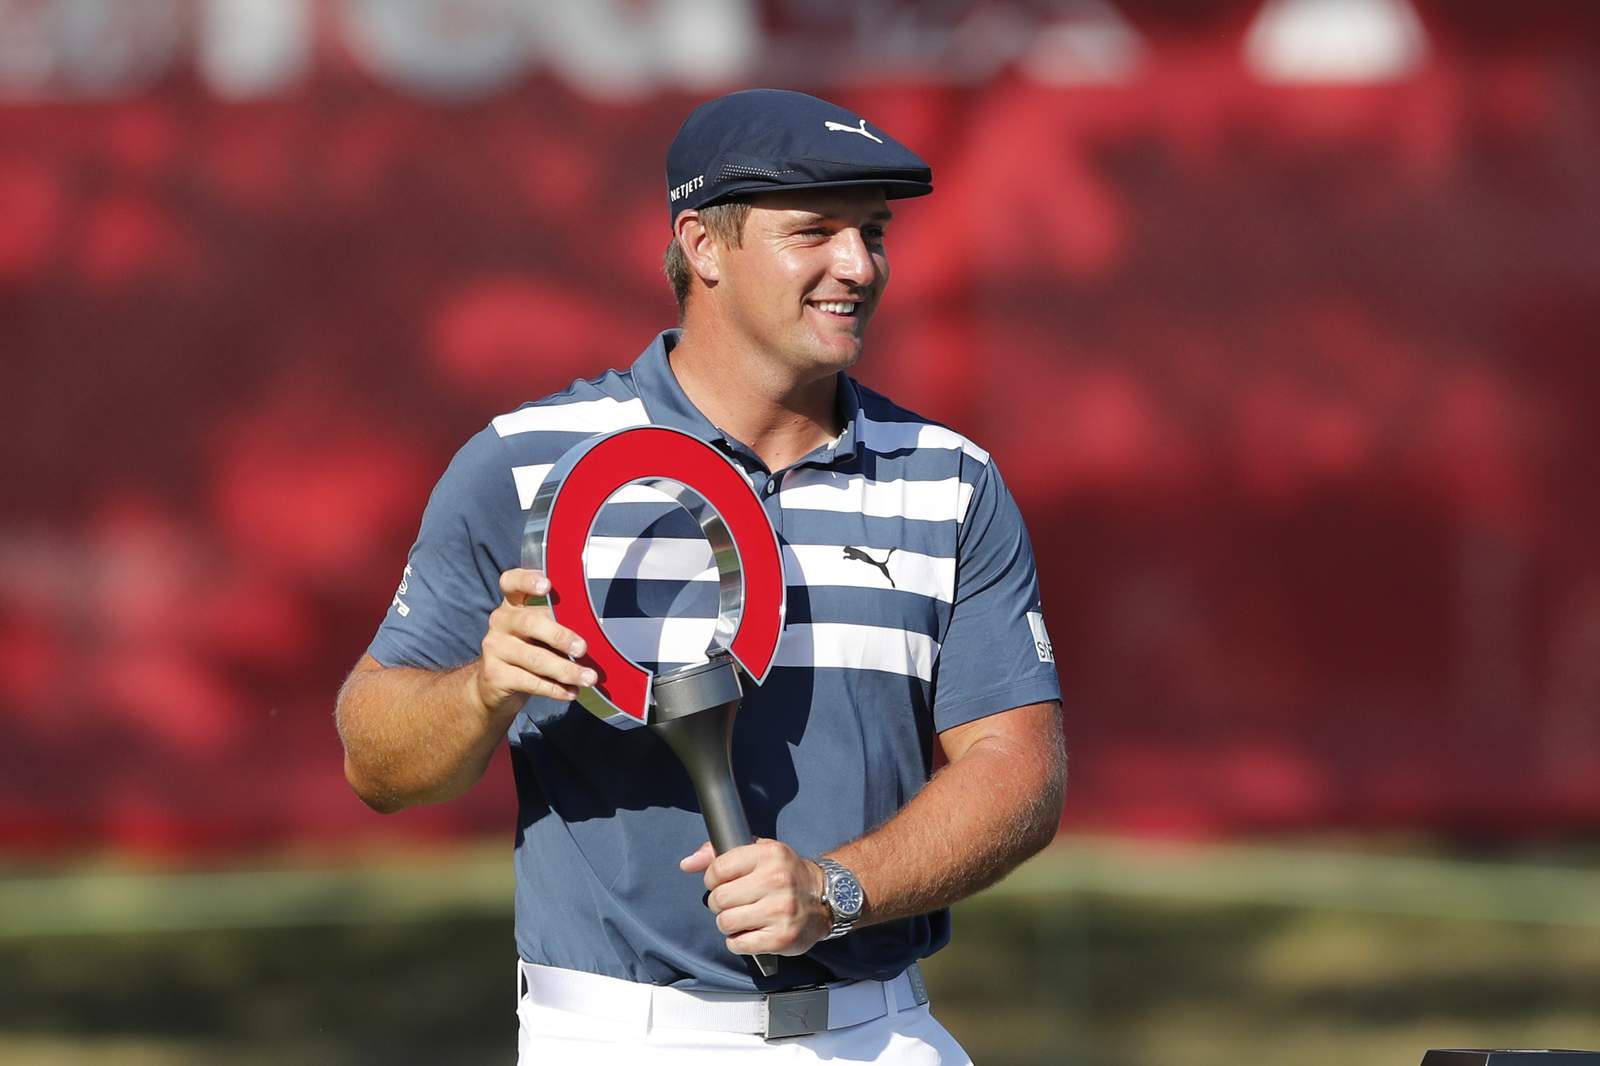 Column: The measure of DeChambeau is if anyone copies him